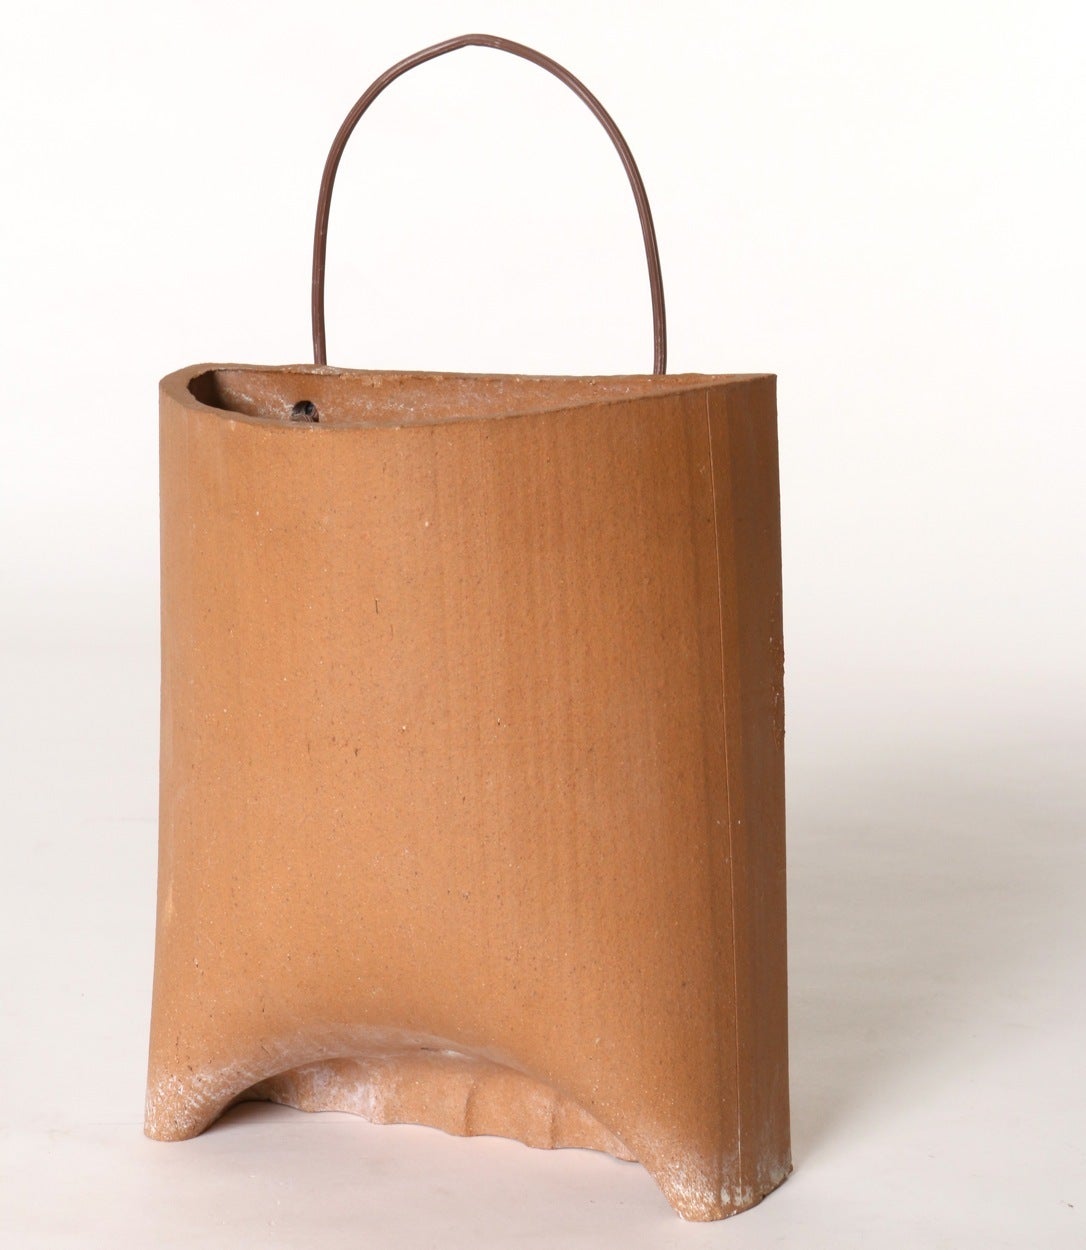 Wonderfully simple in aesthetic and form it's no surprise that this 1970s ceramic wall pocket with electrical wire cord is attributed to California ceramic artist Stan Bitters. As stylish as it is functional it makes the perfect container to grow